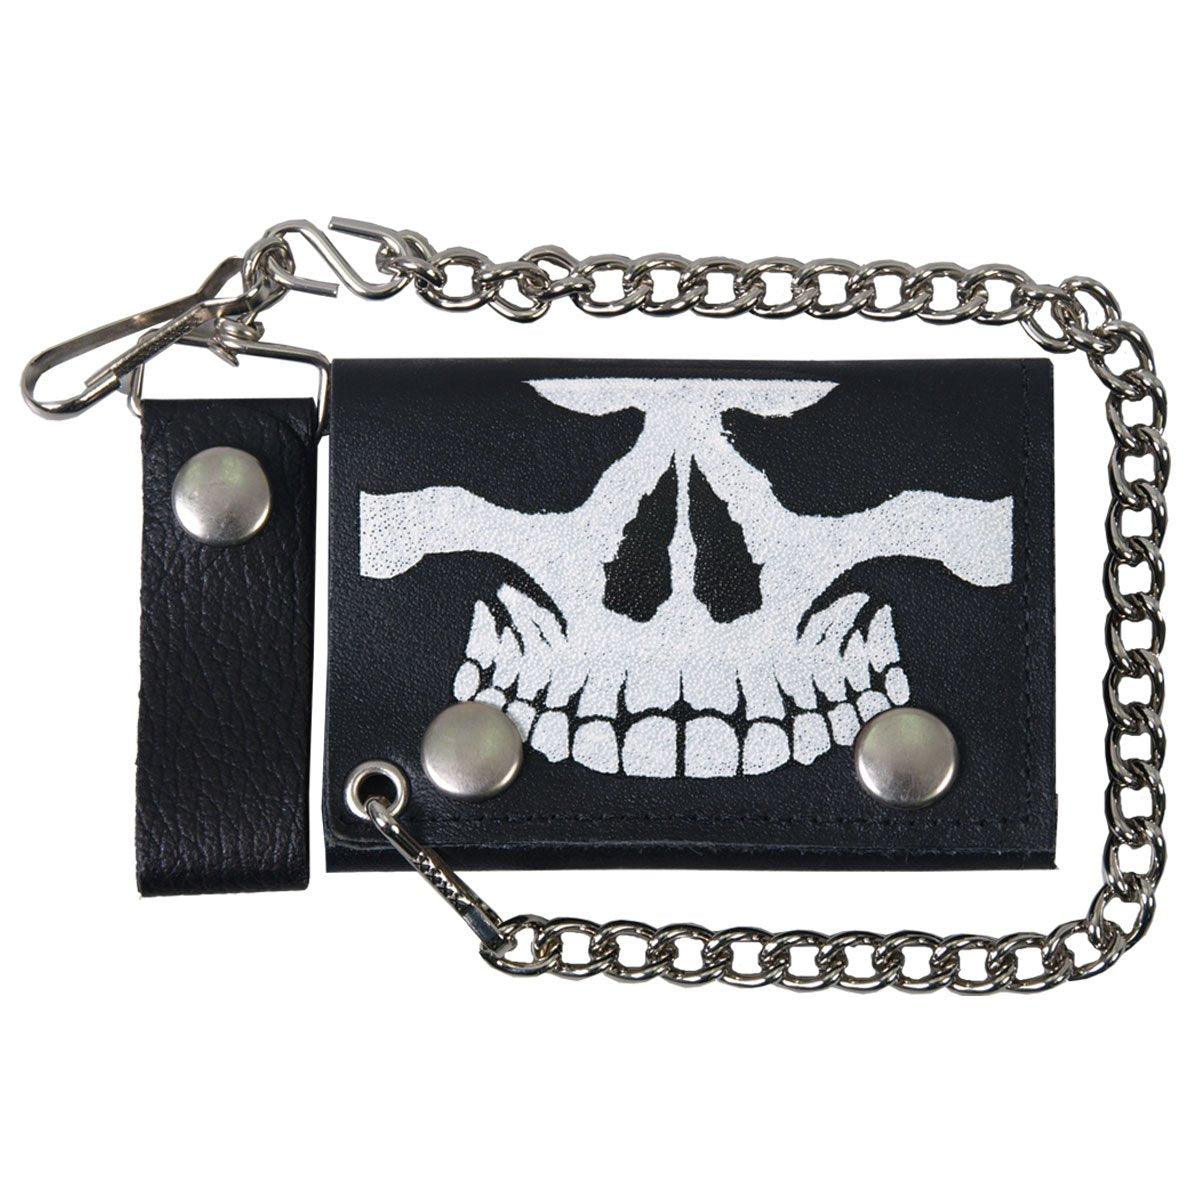 Hot Leathers Skull Leather Wallet - American Legend Rider